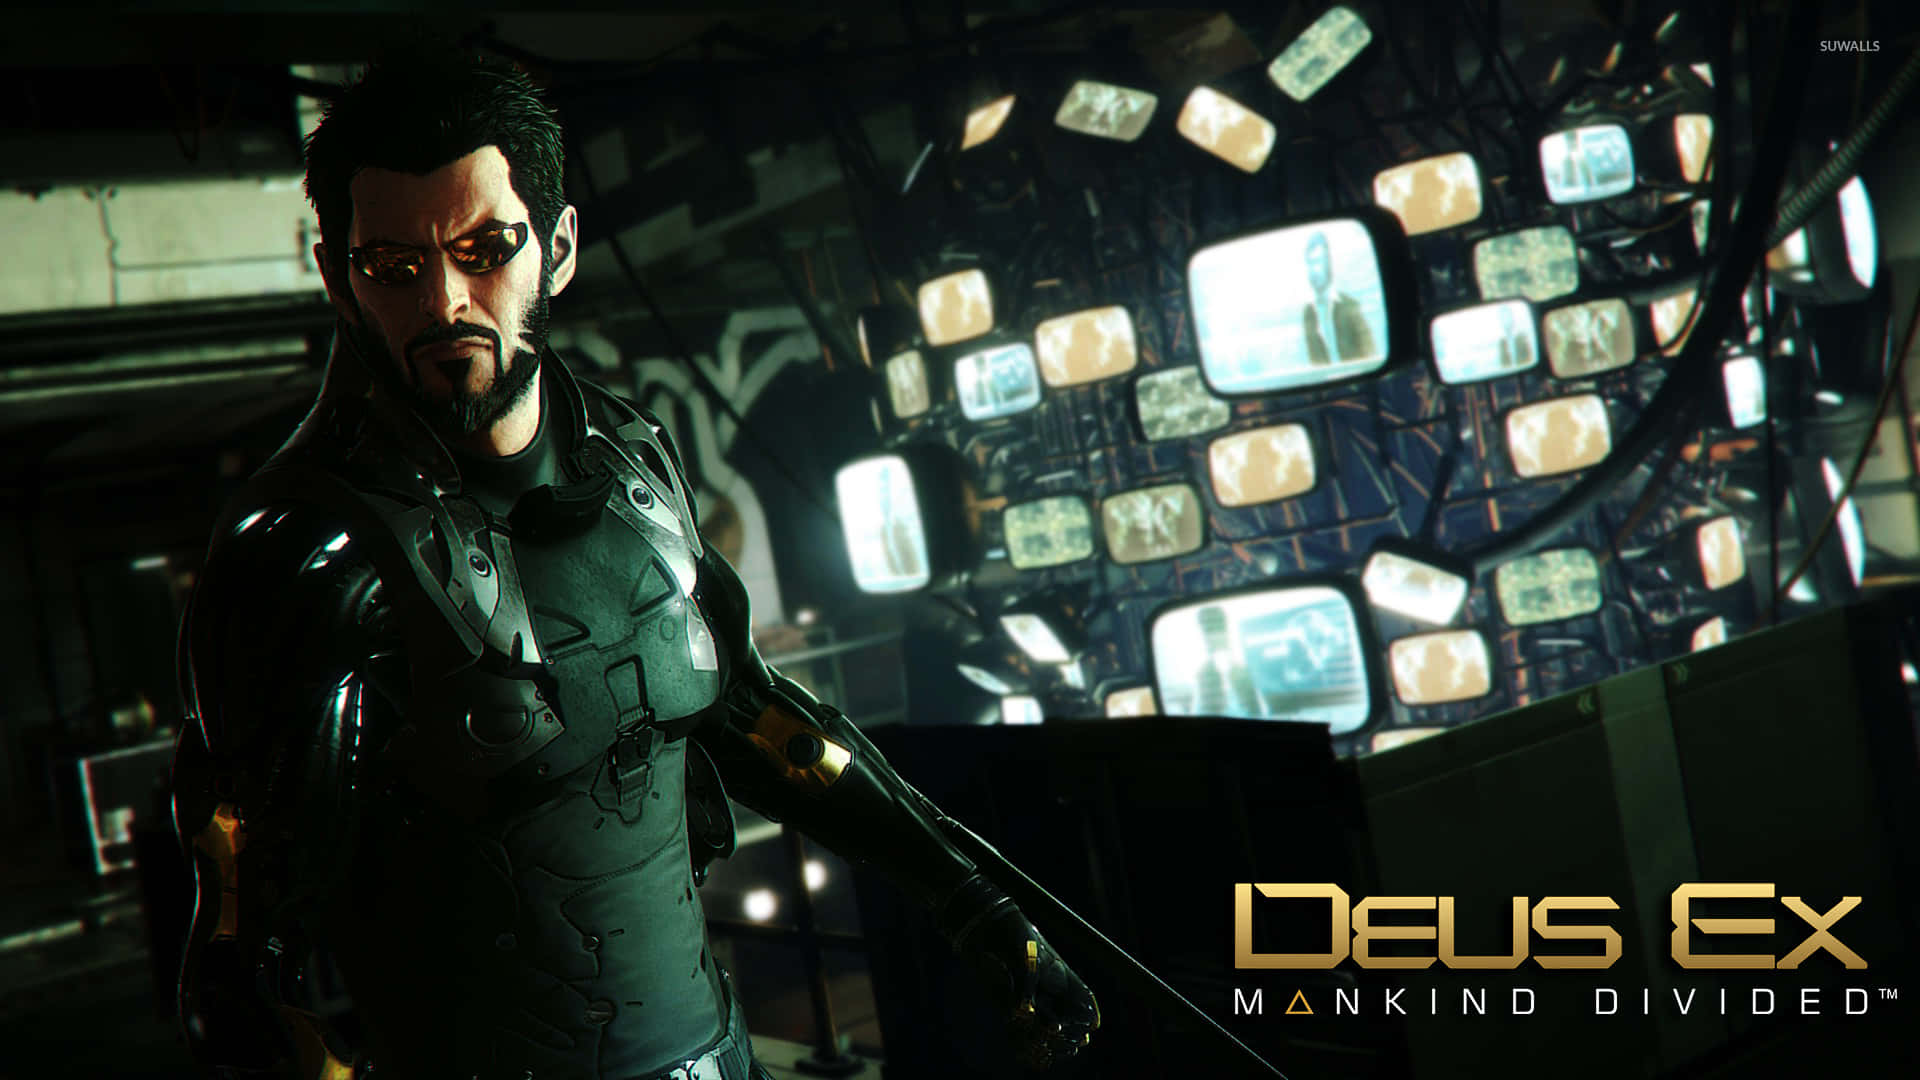 Journey Through The Cyberpunk World Of Mankind Divided